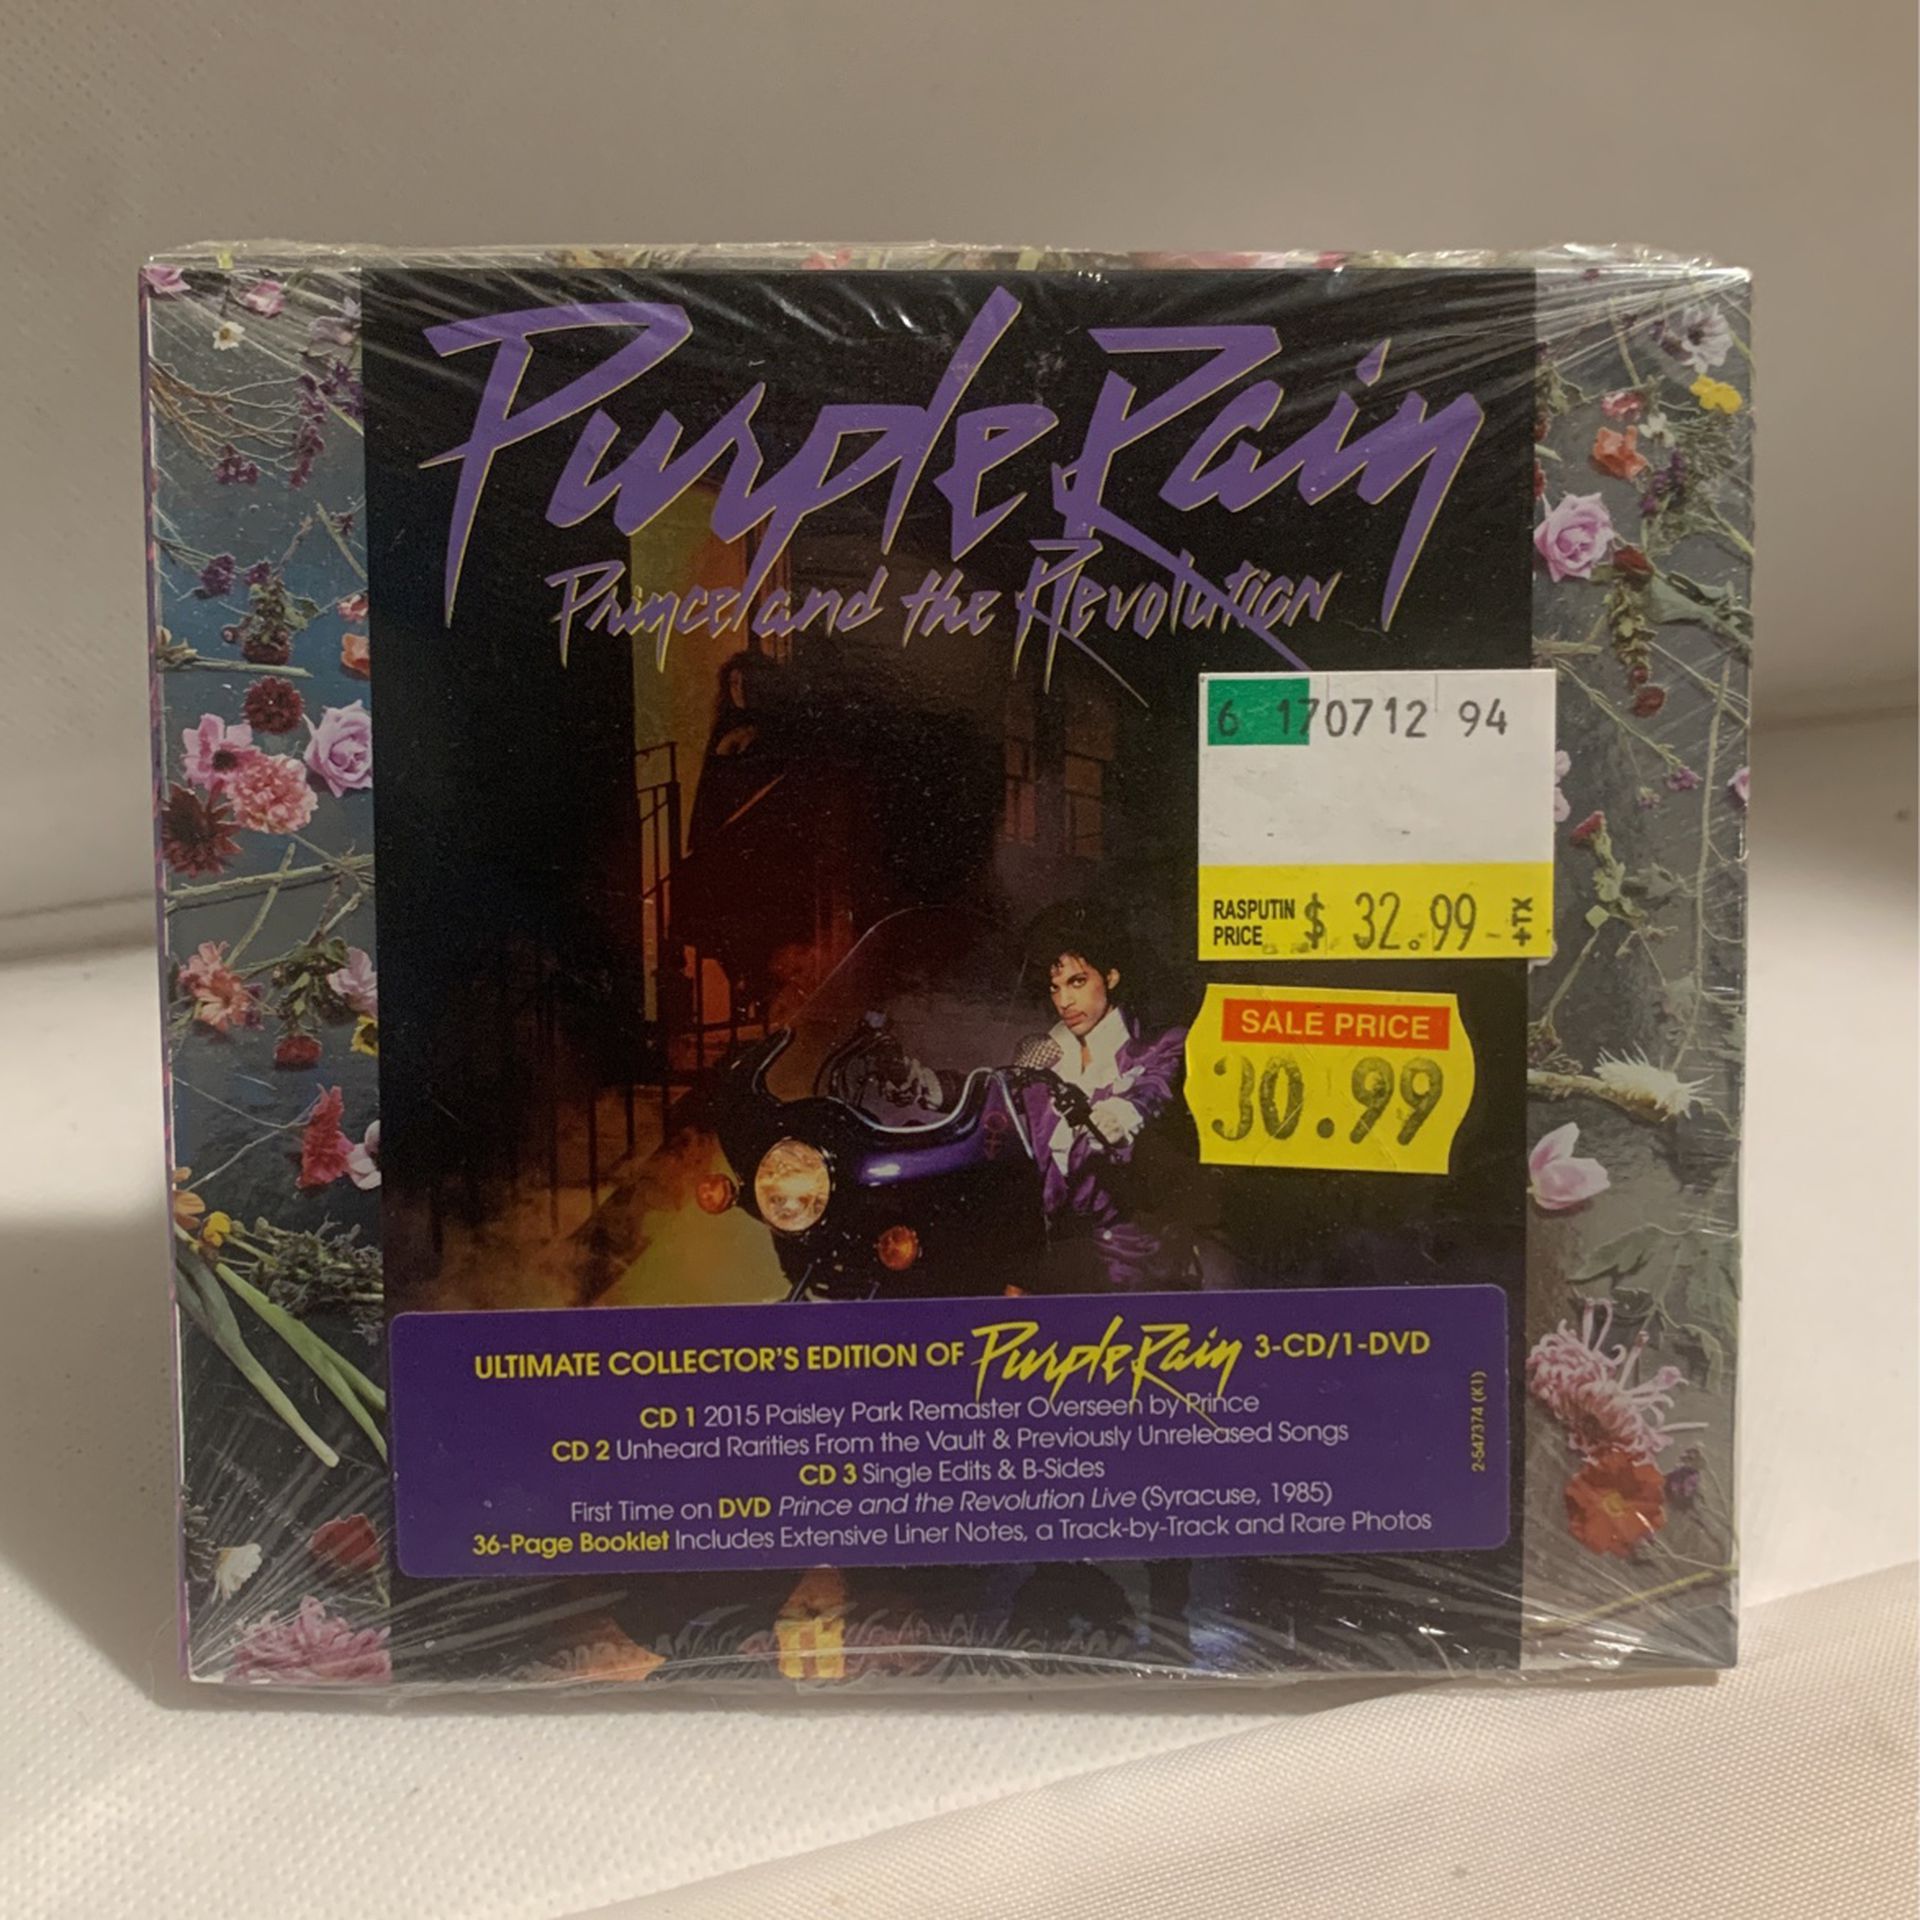 Sealed Purple Rain Prince And The Revolution Cd/dvd Ultimate Collectors Edition Set